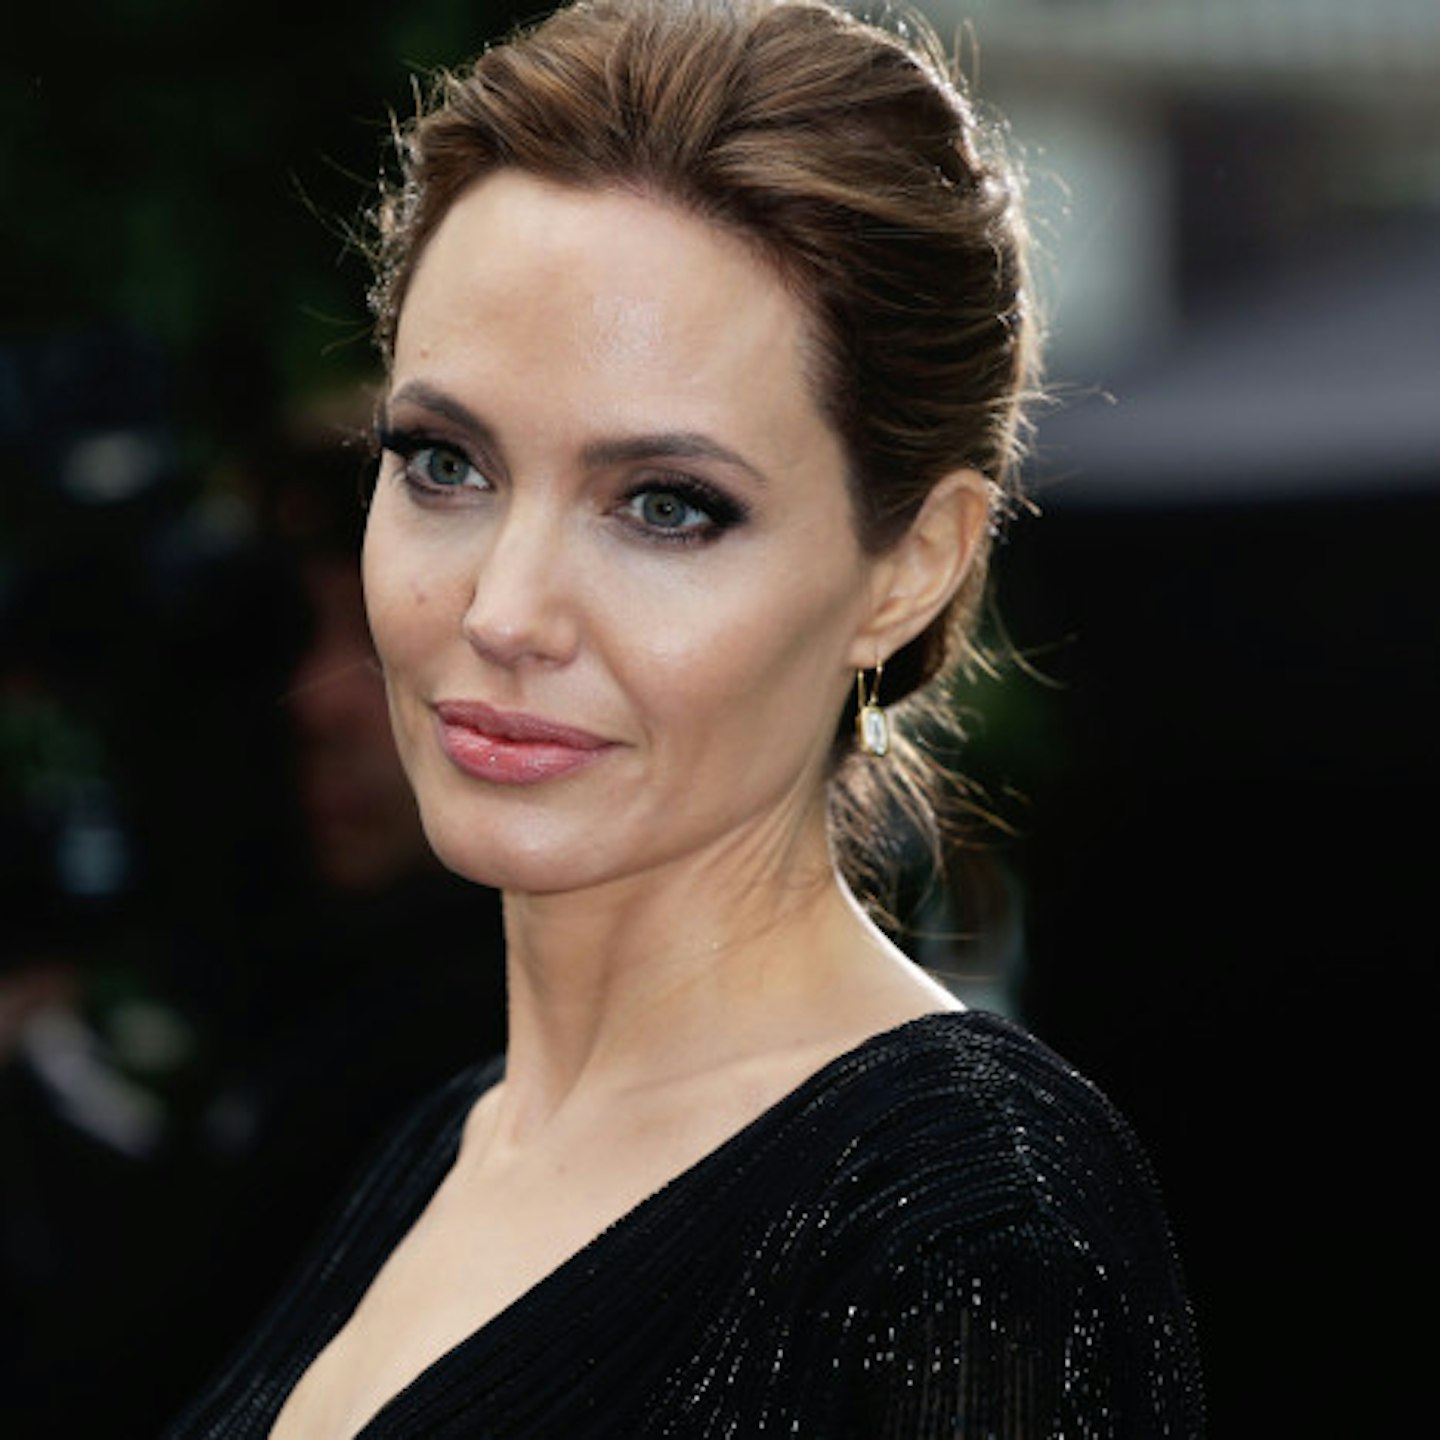 Angelina Jolie revealed this week that she had undergone preventive surgery to remove her ovaries and fallopian tubes.